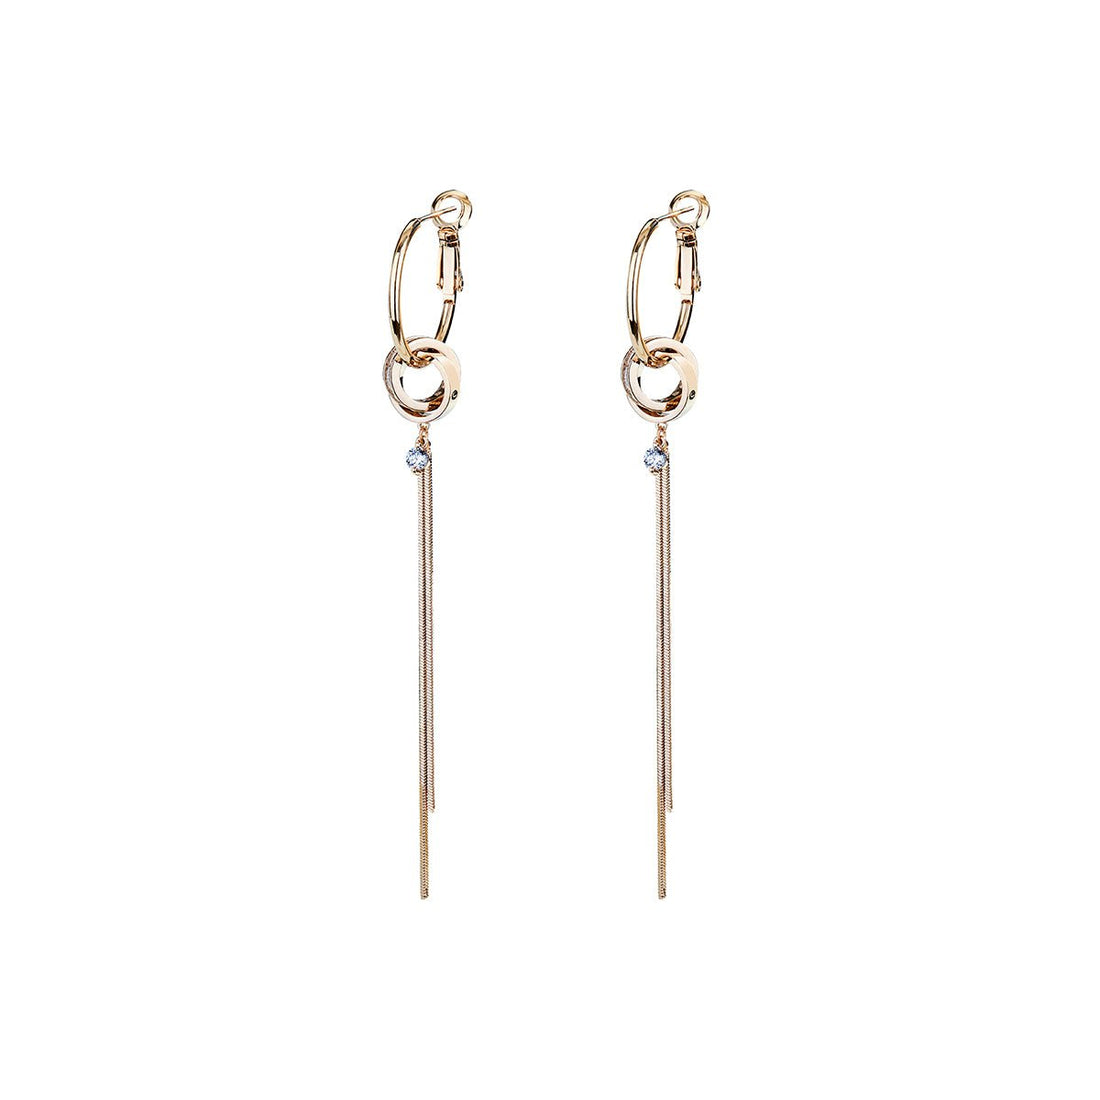 Out of Reach Gold Earrings - 0cm